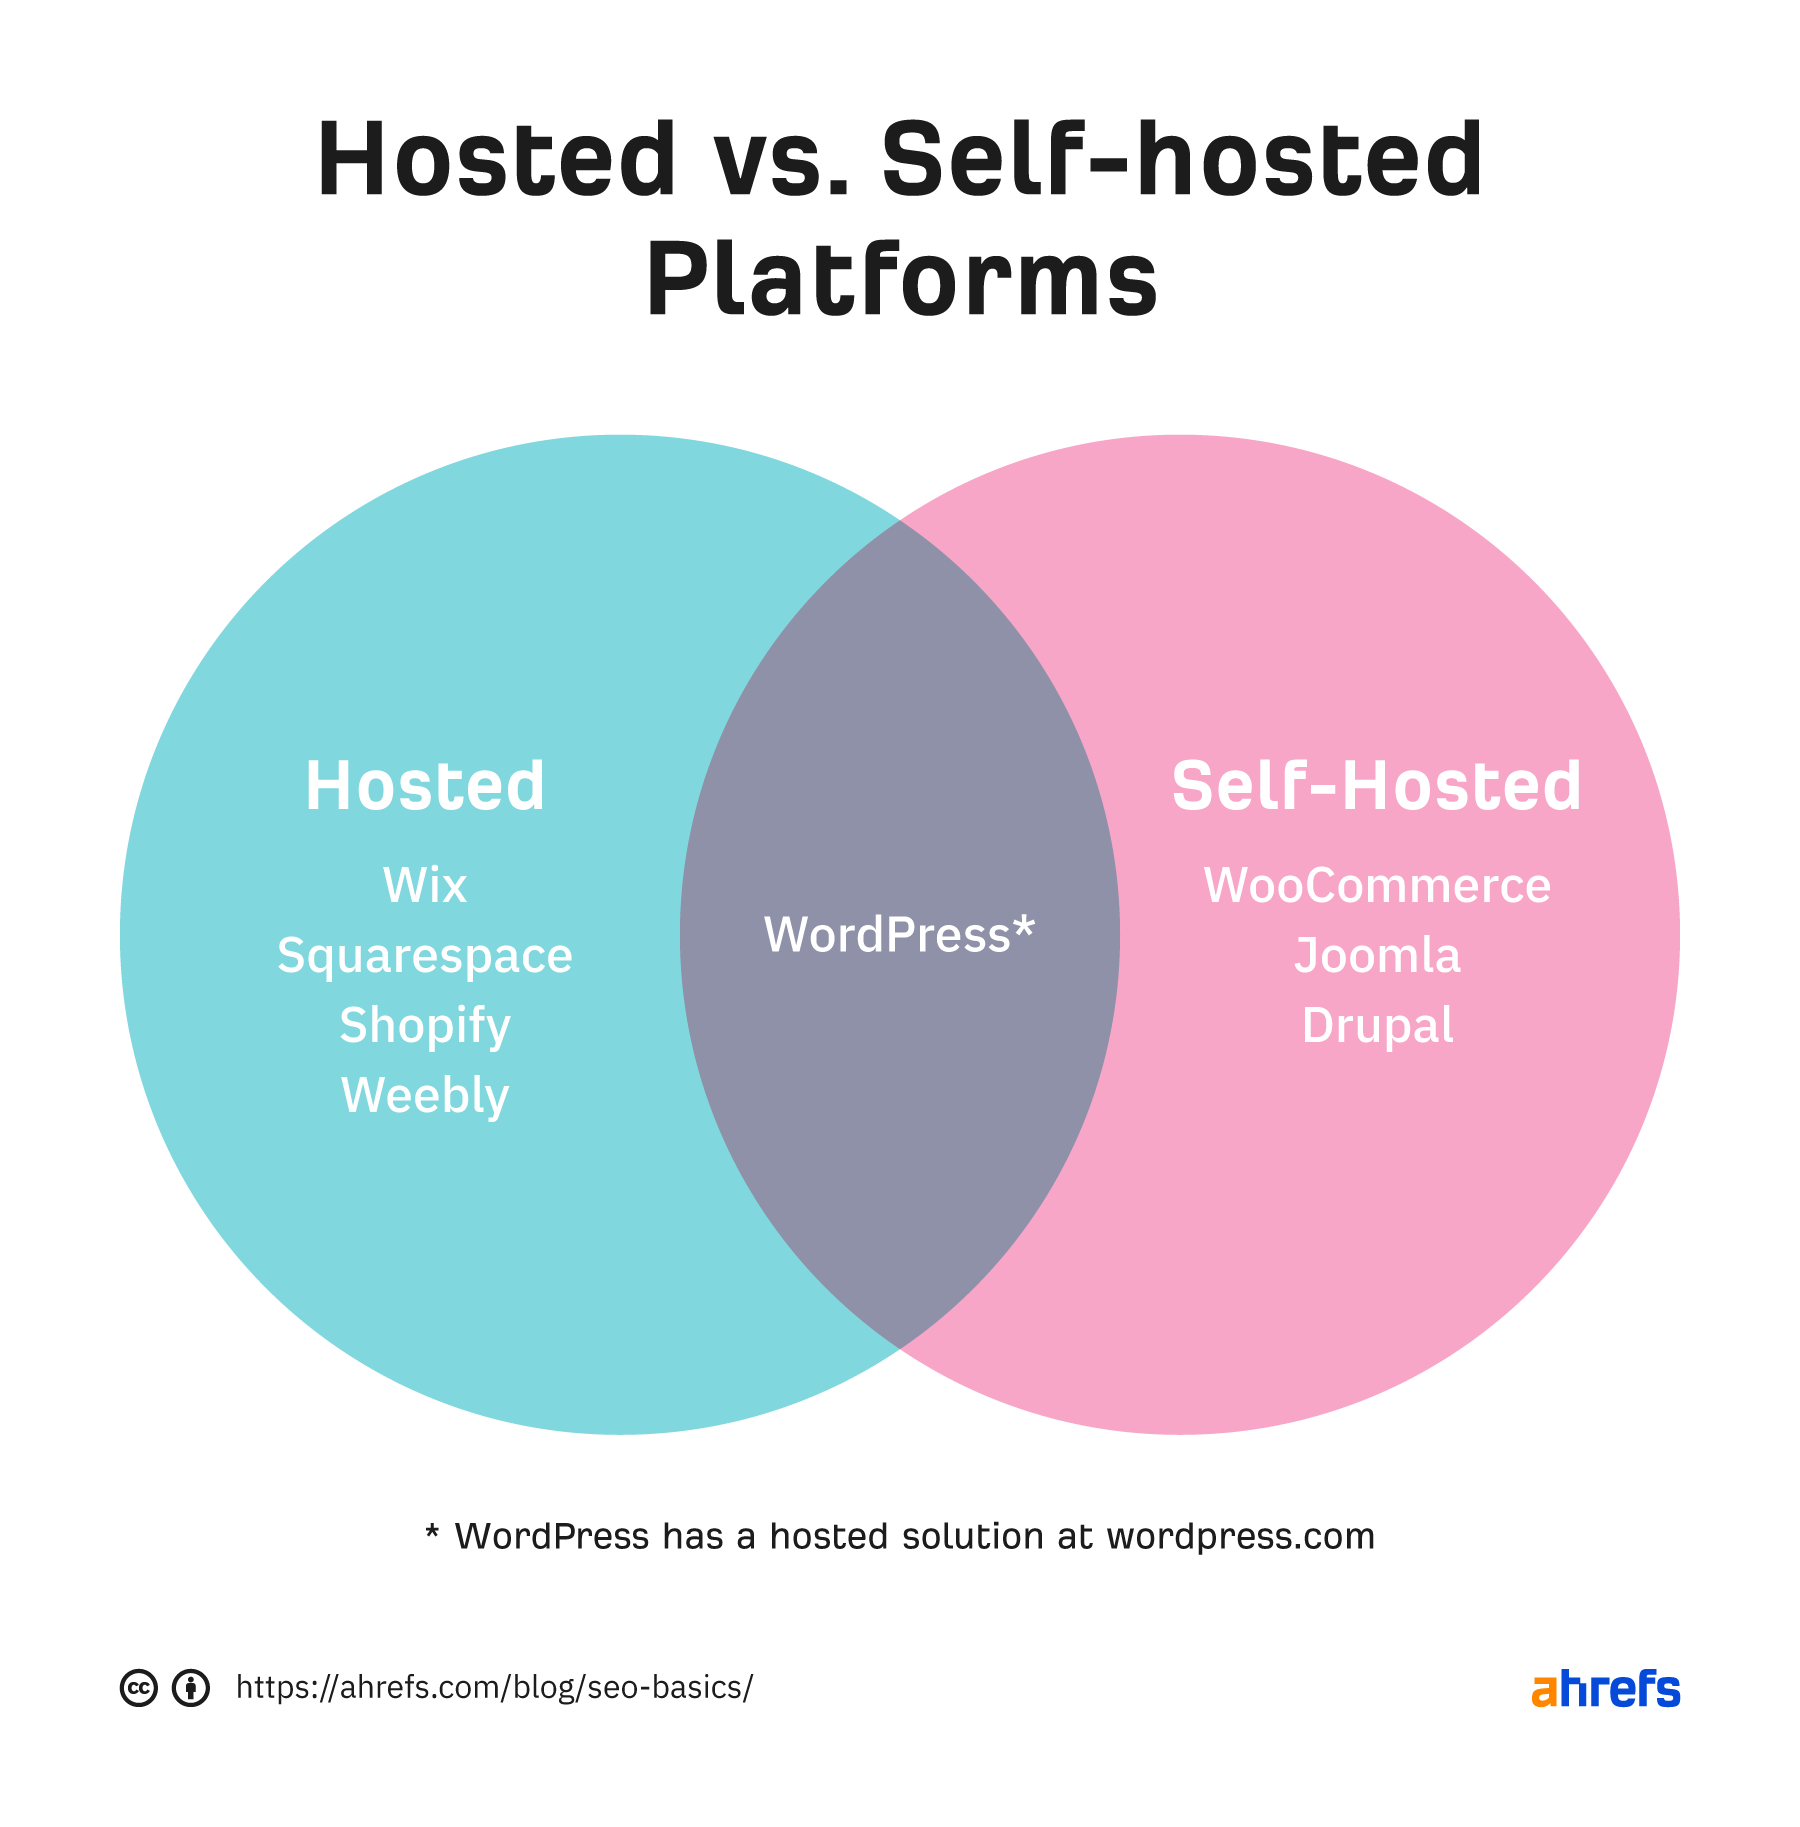 Examples of hosted vs. self-hosted website platforms